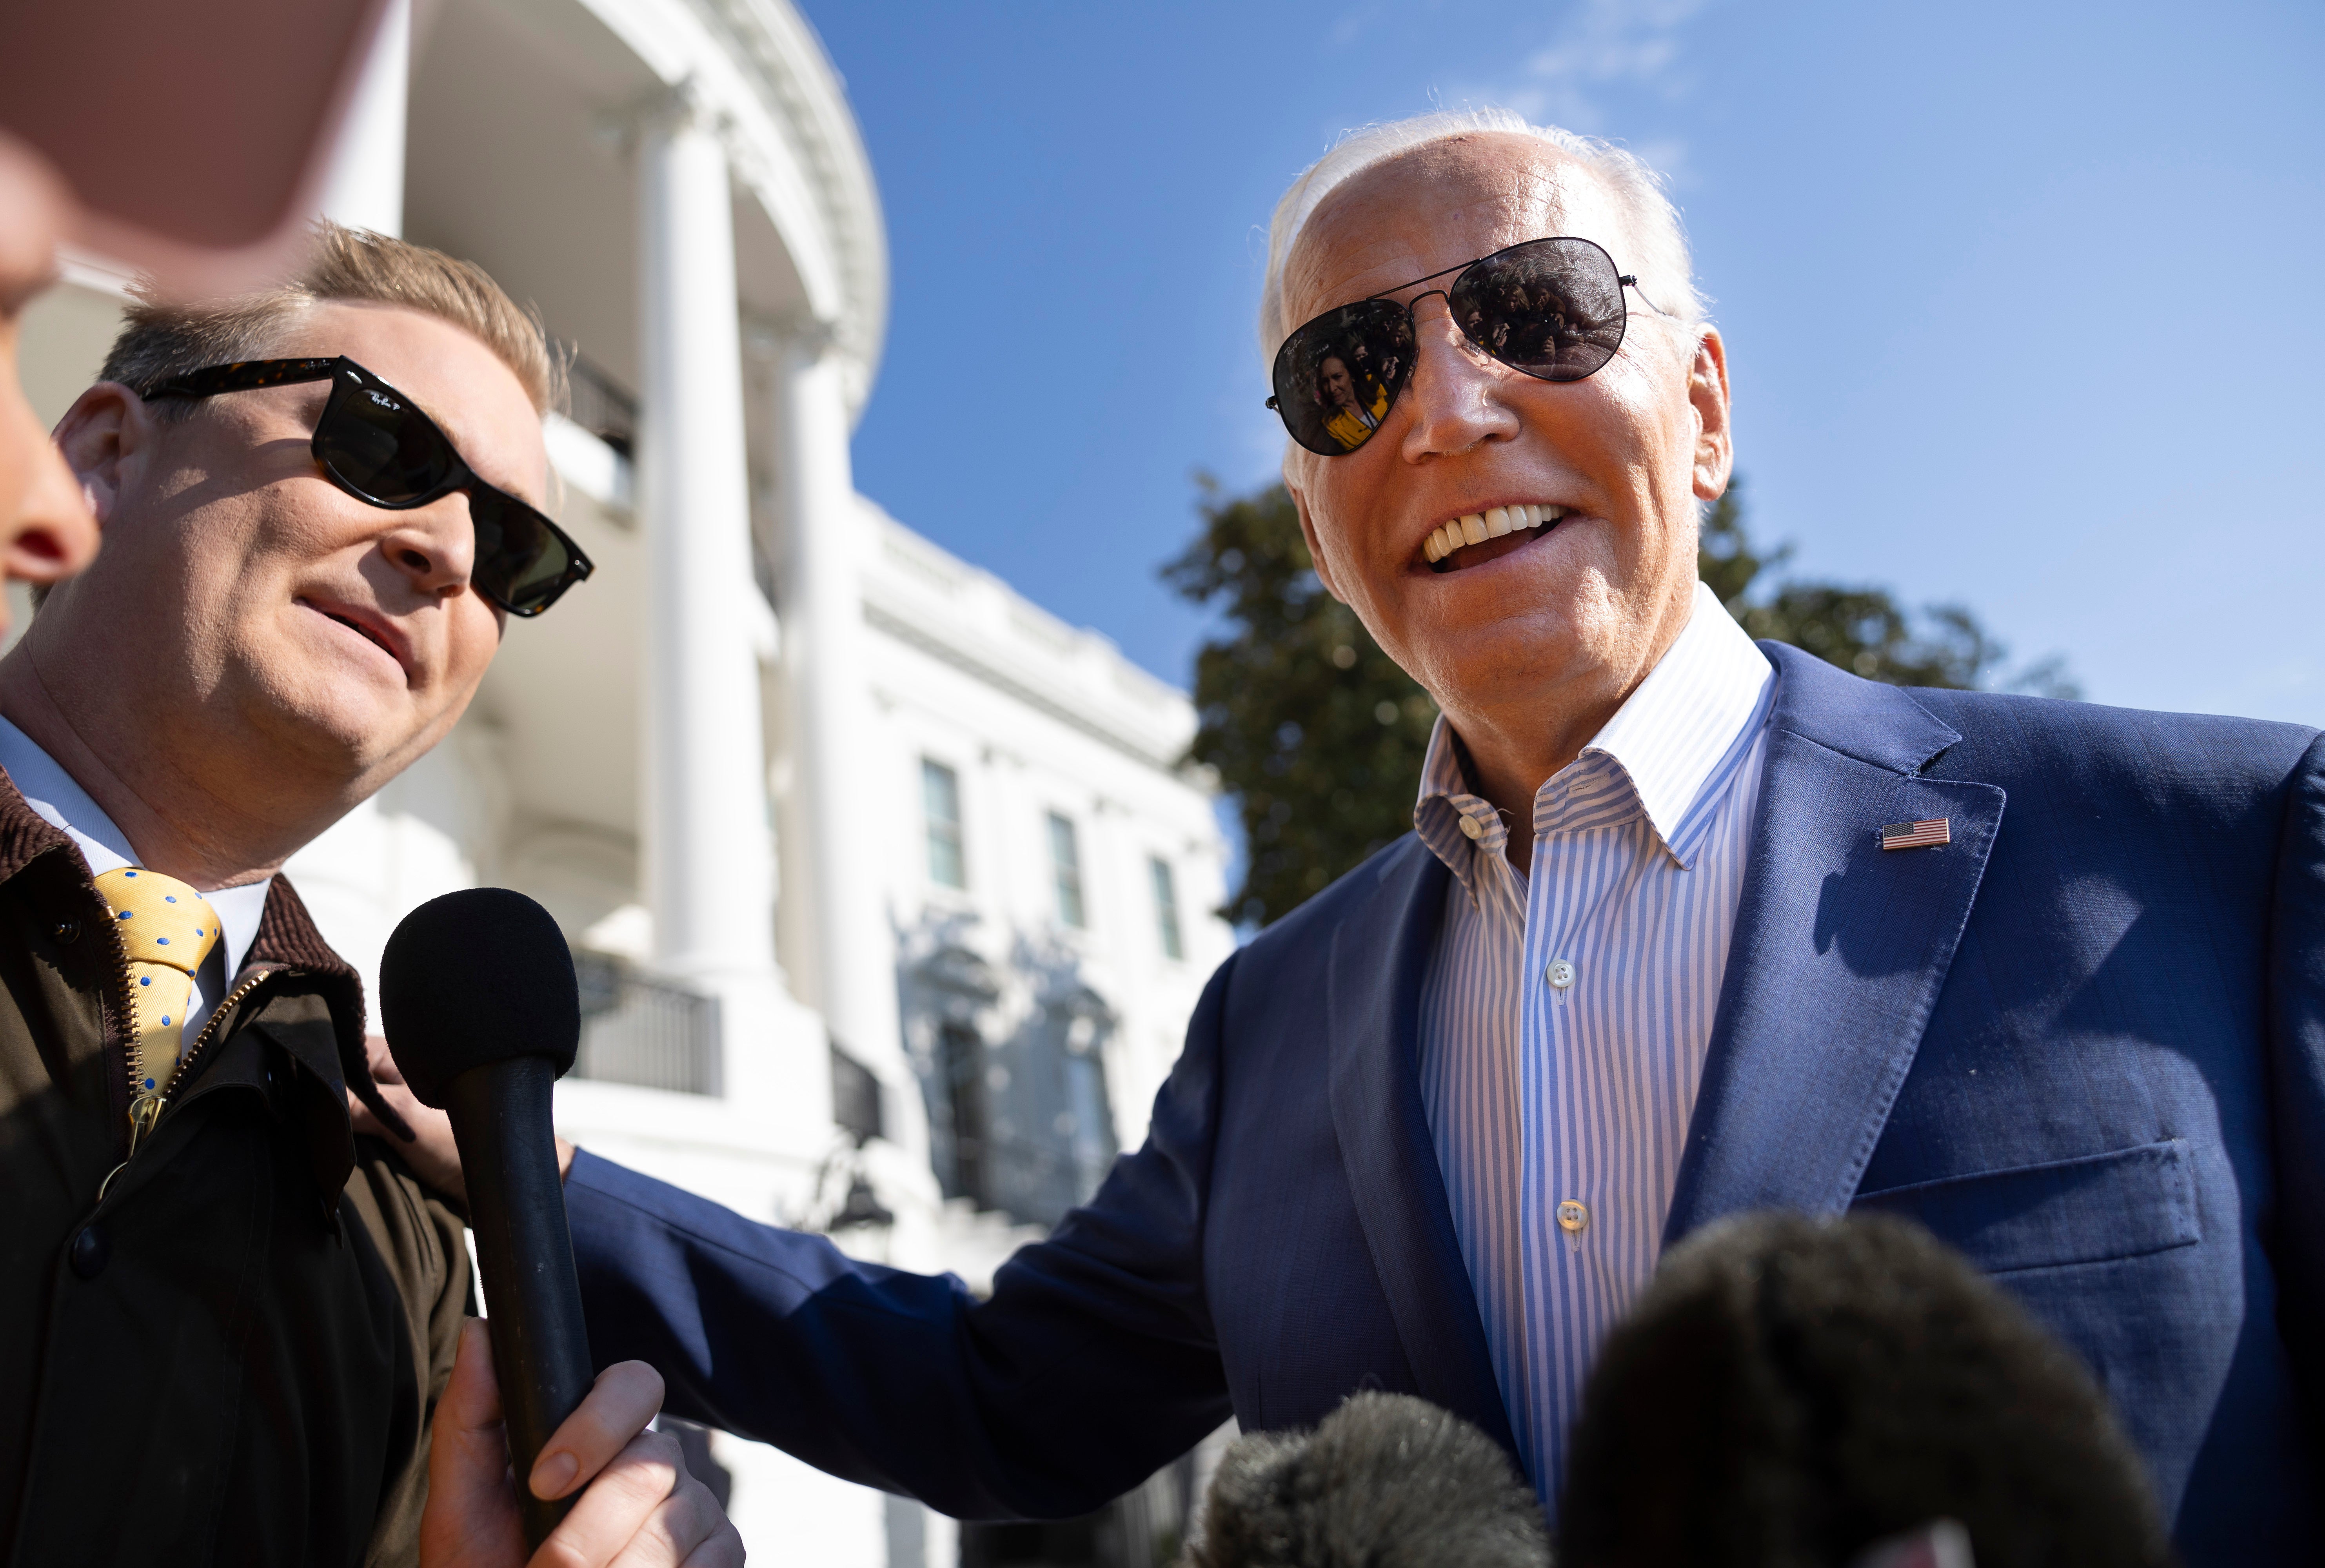 President Joe Biden answers a question from Fox News correspondent Peter Doocy as he speaks to members of the media while departing the White House on November 09, 2023 in Washington, DC